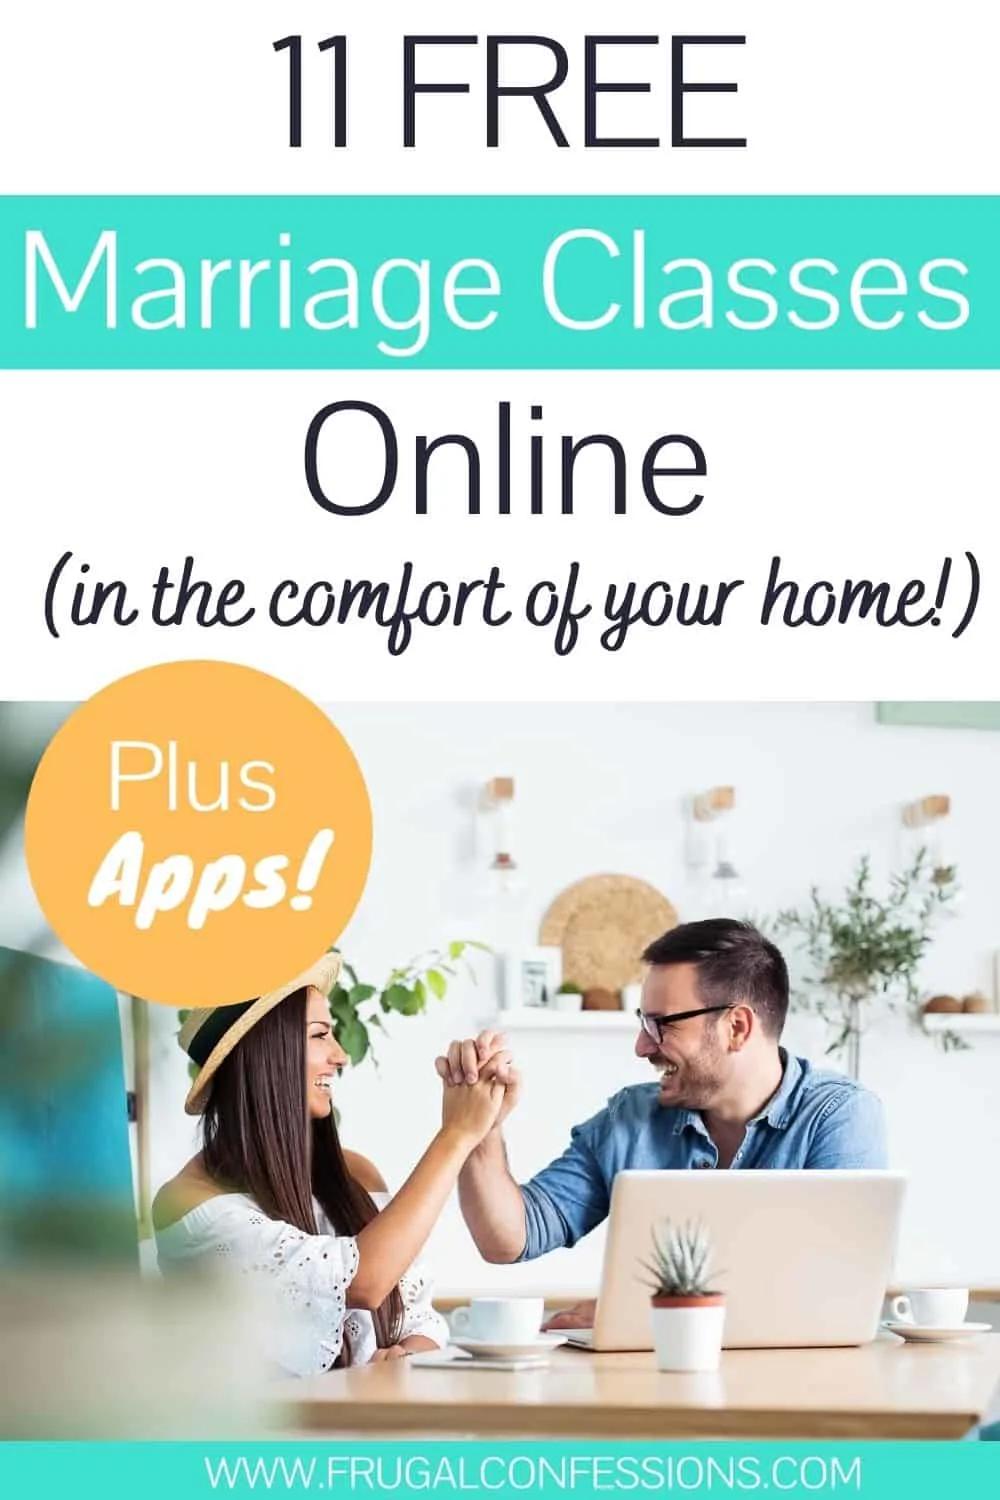 Marriage preparation course online free